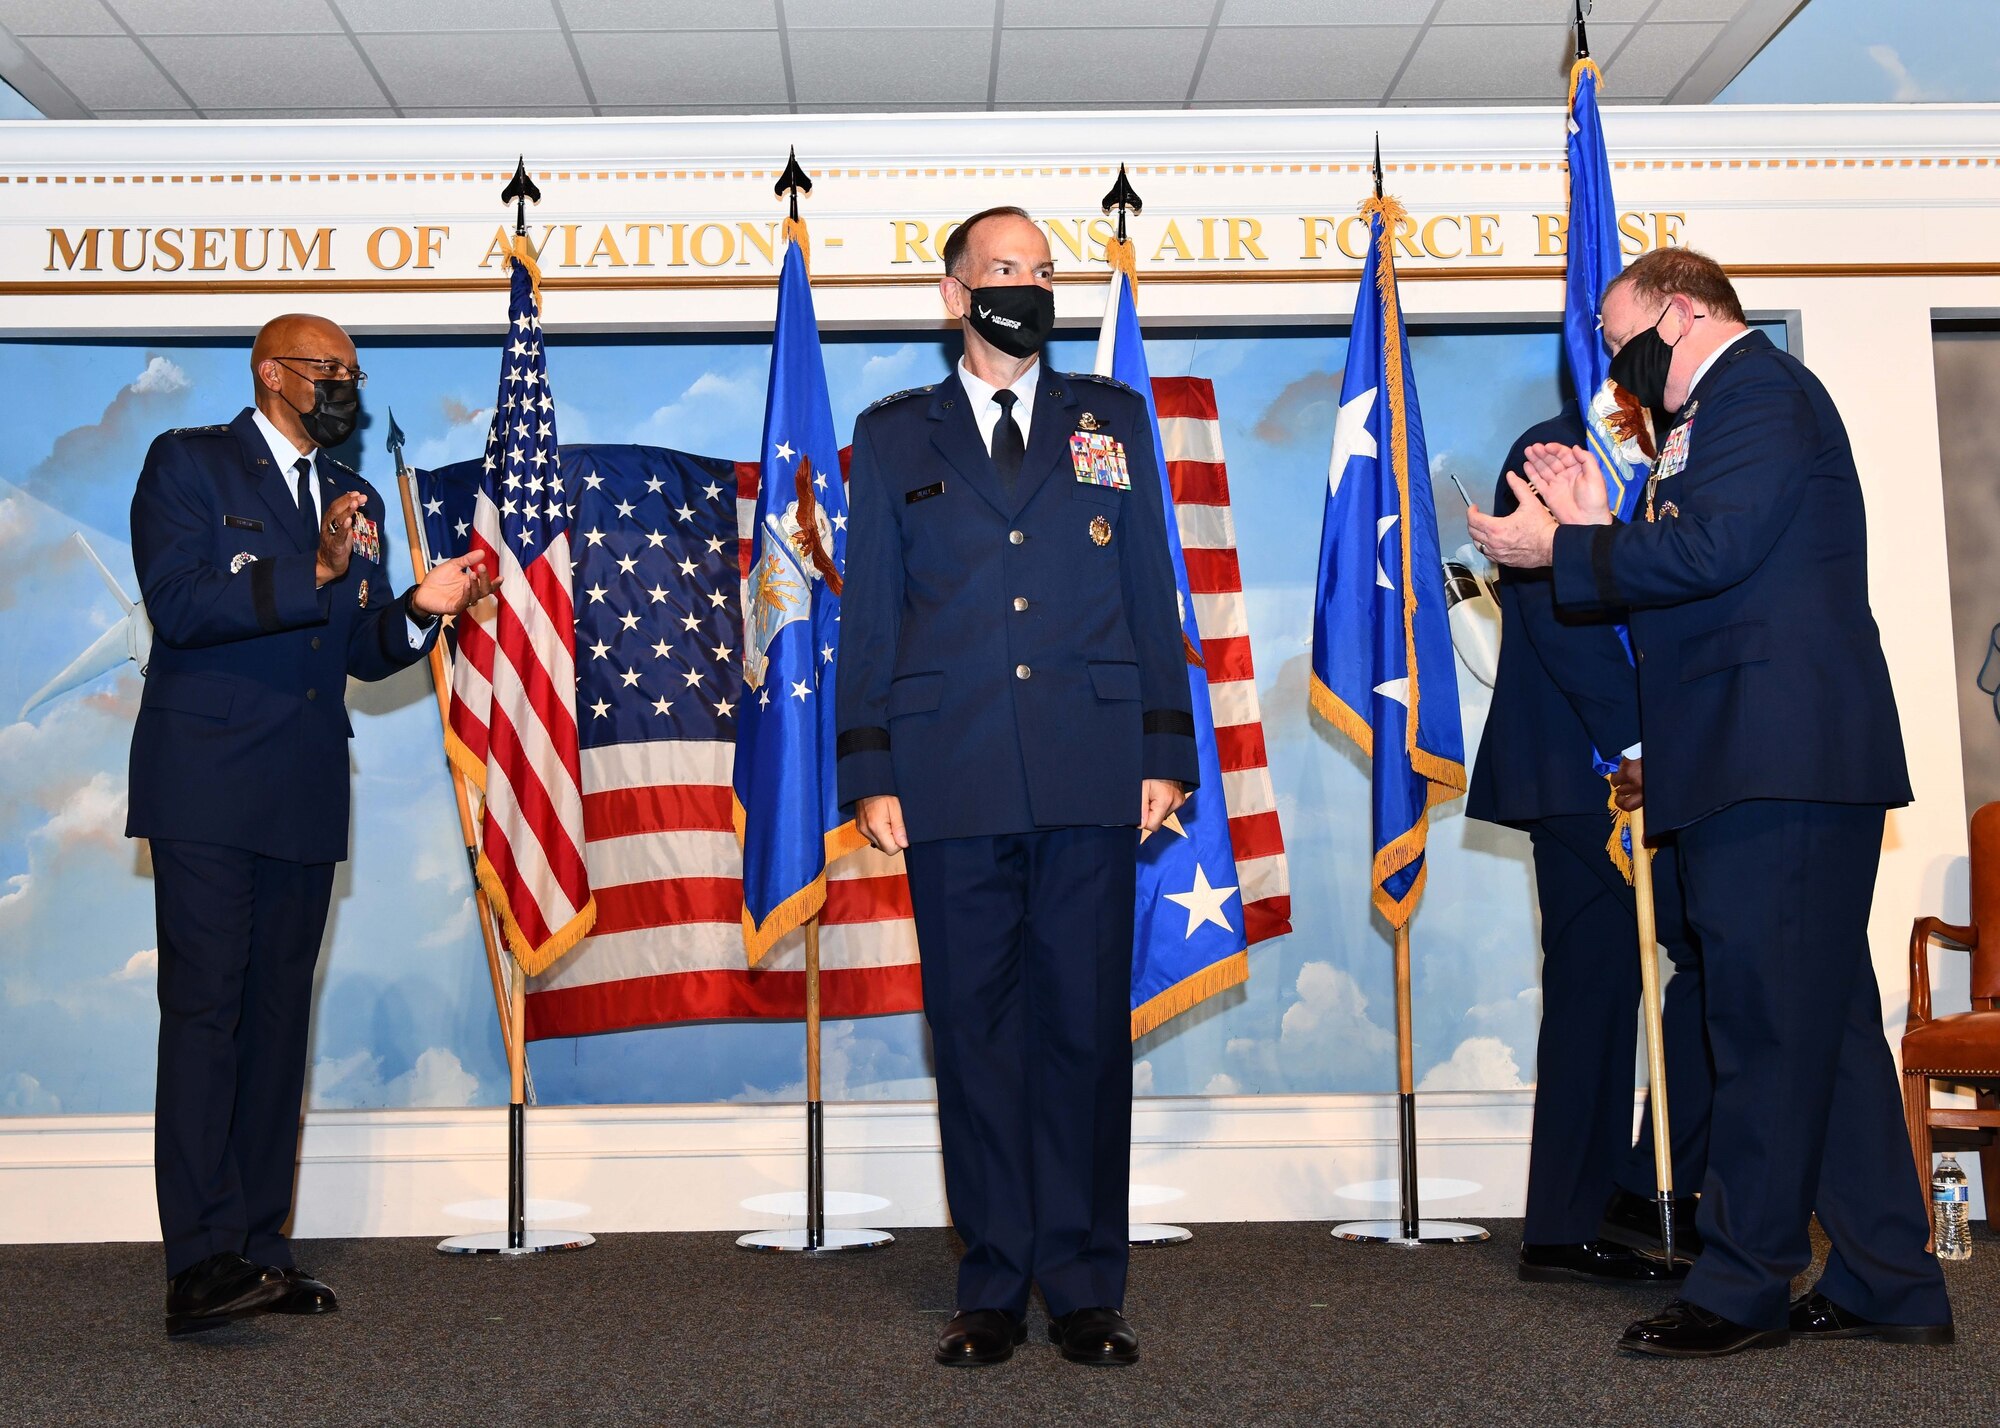 Lt. Gen. John Healy receives applause on stage after taking command of Air Force Reserve Command during a ceremony.